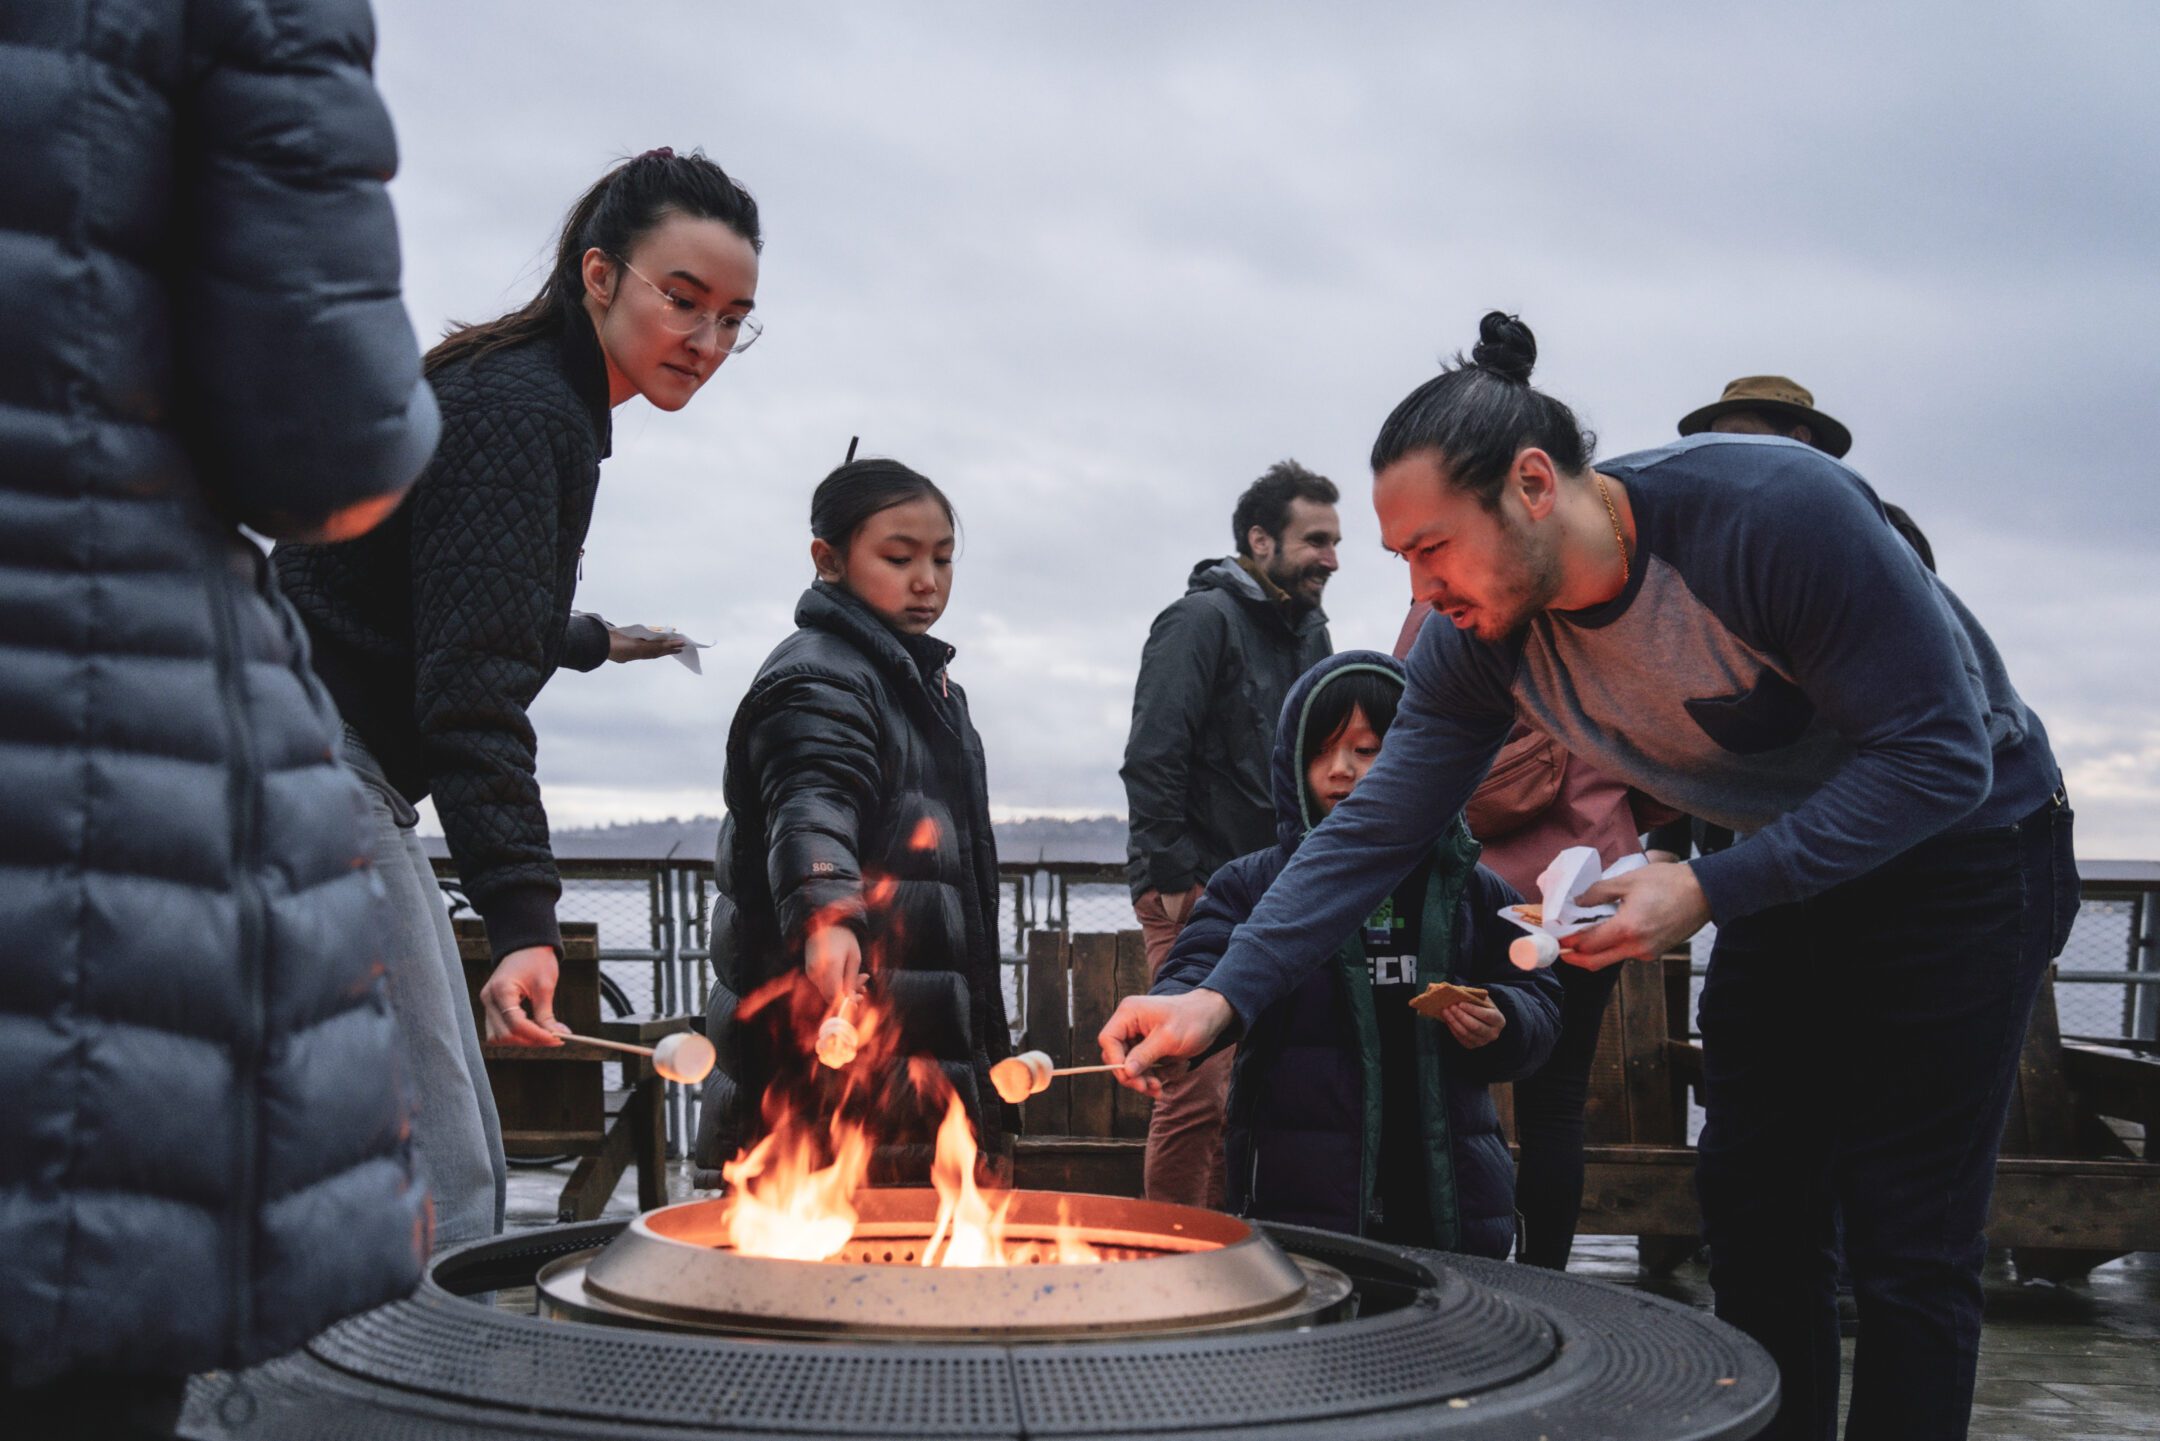 A couple of people lean over a fire pit on Pier 62 to roast marshmallows.